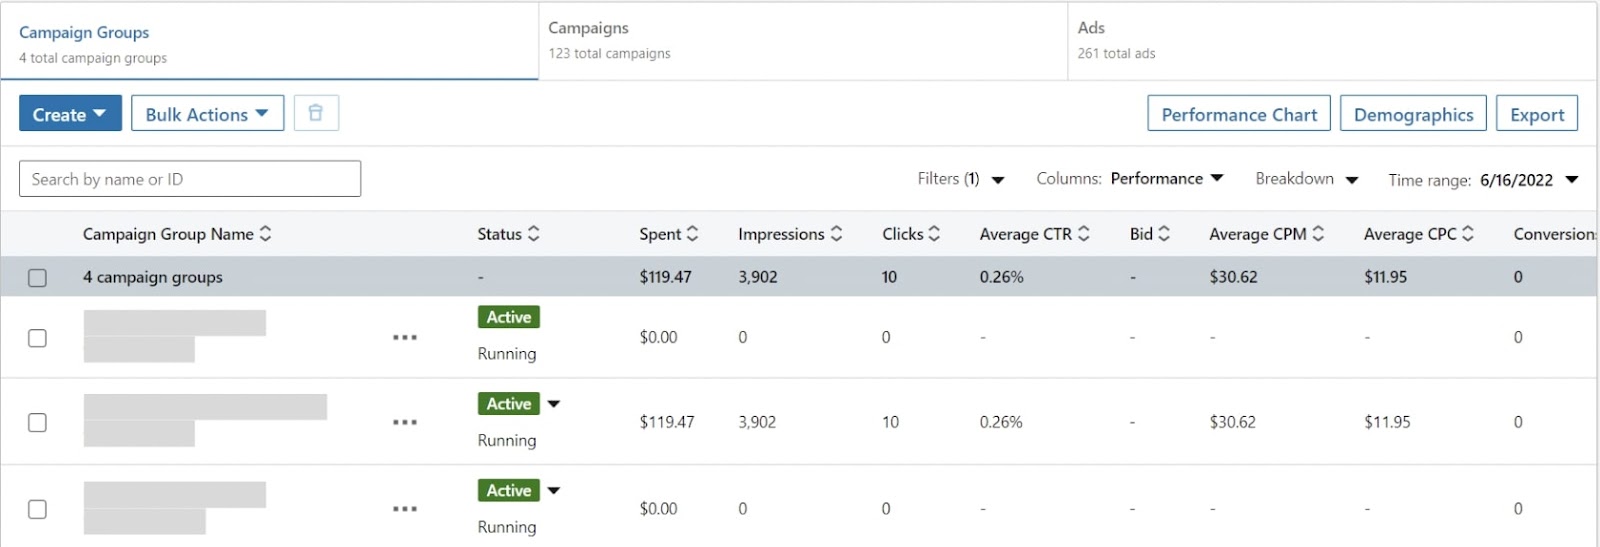 LinkedIn Ads performance dashboard populated with 3 campaign groups